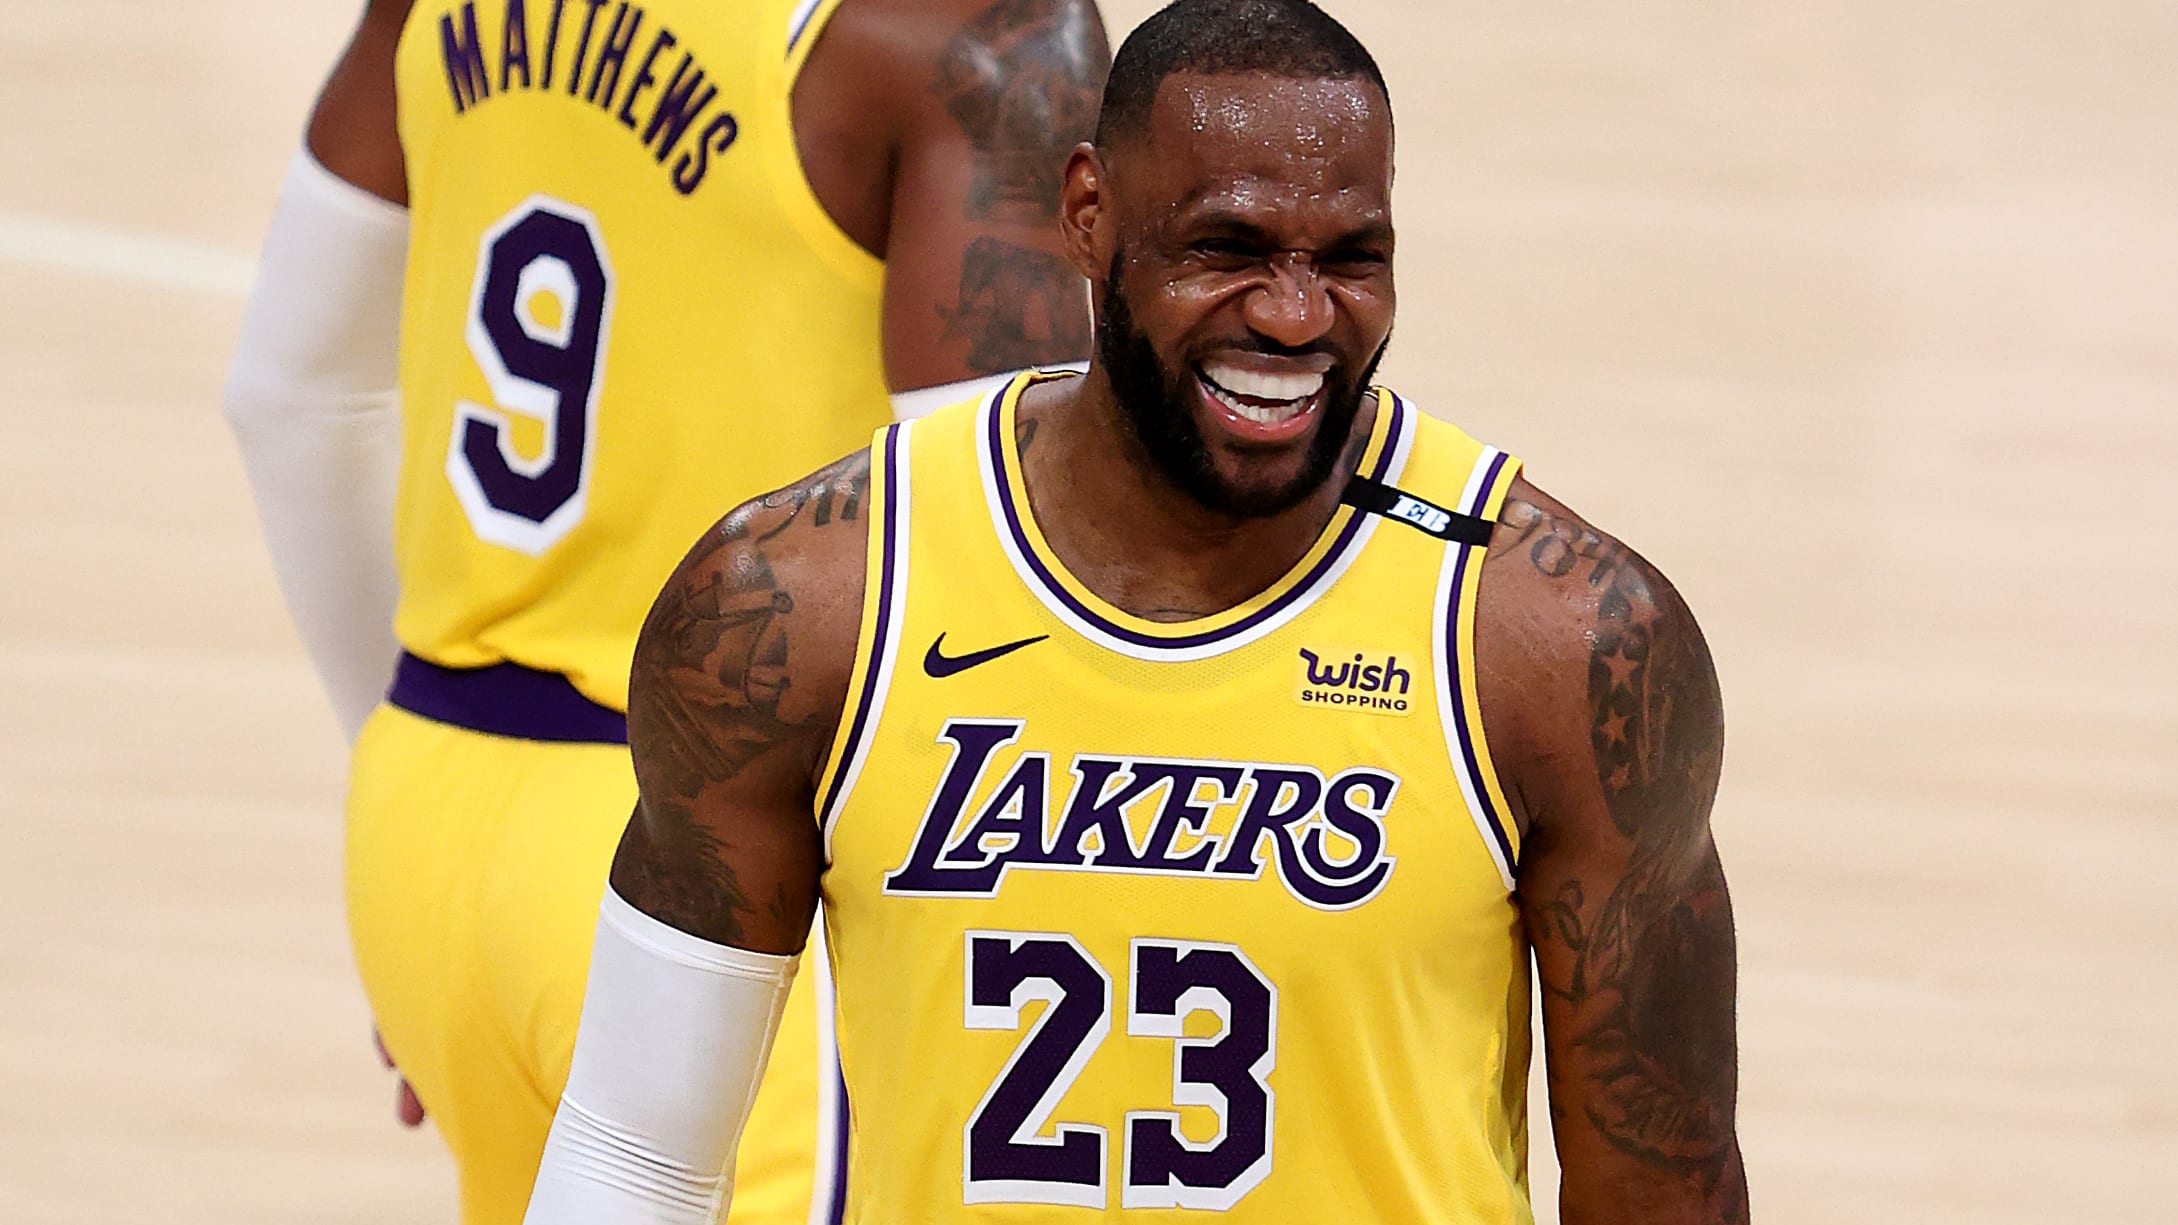 LeBron James: Lakers star is switching jersey numbers back to 6